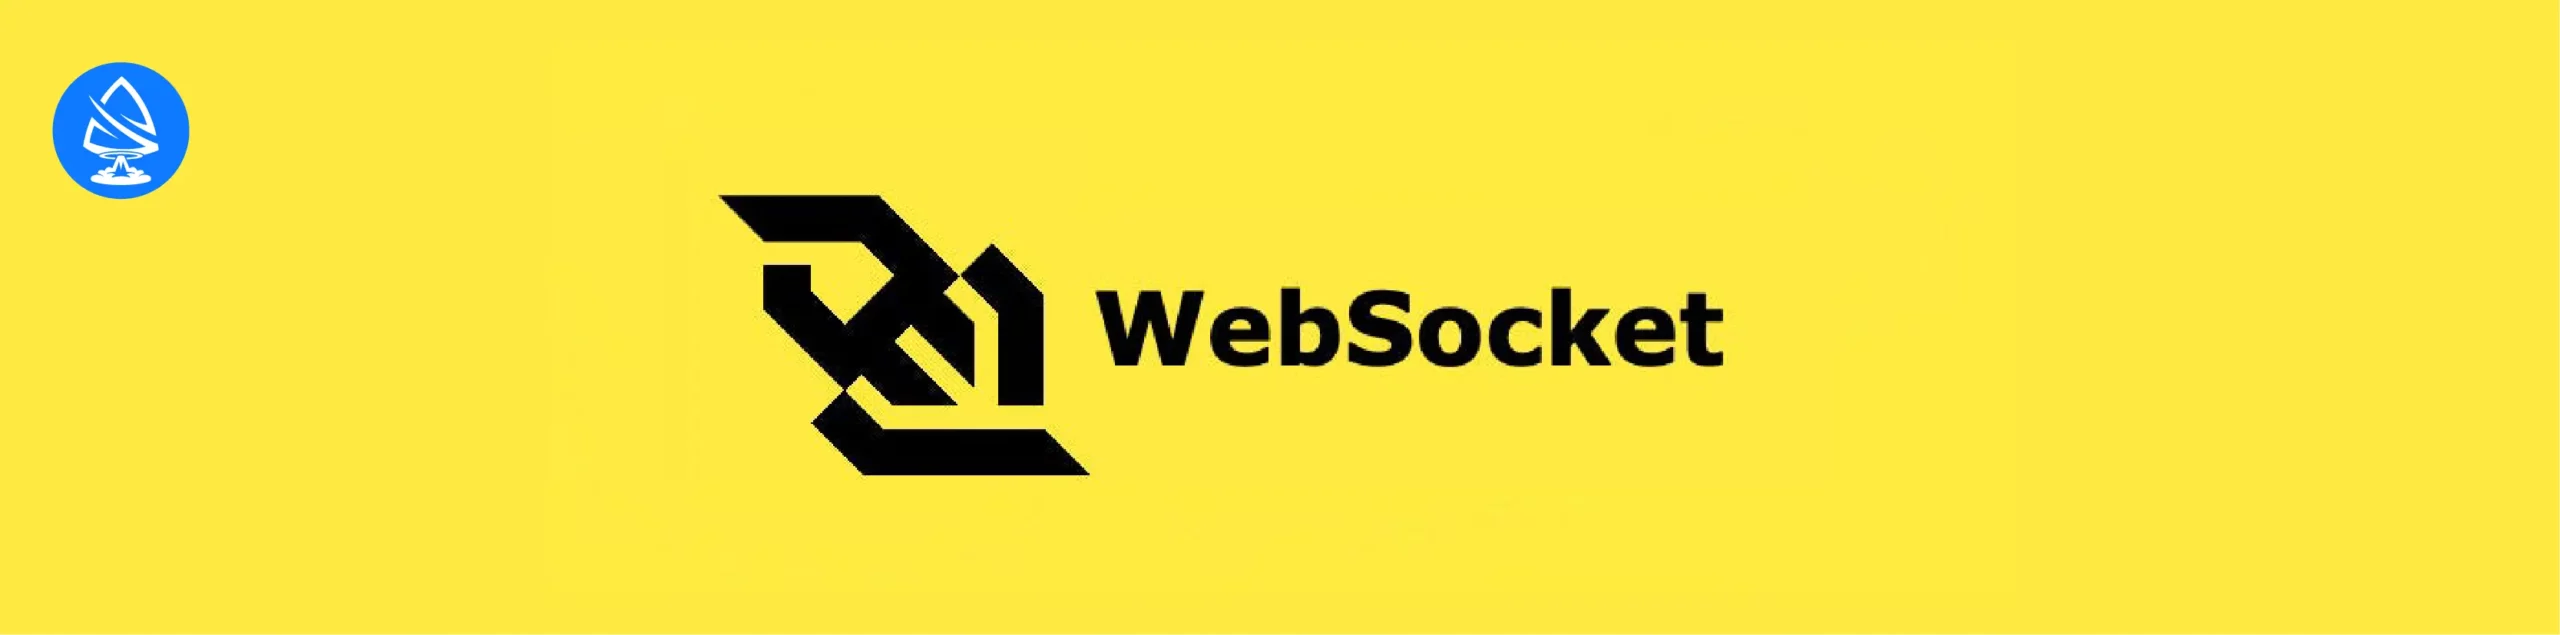 What is WebSocket and why is it significant? 